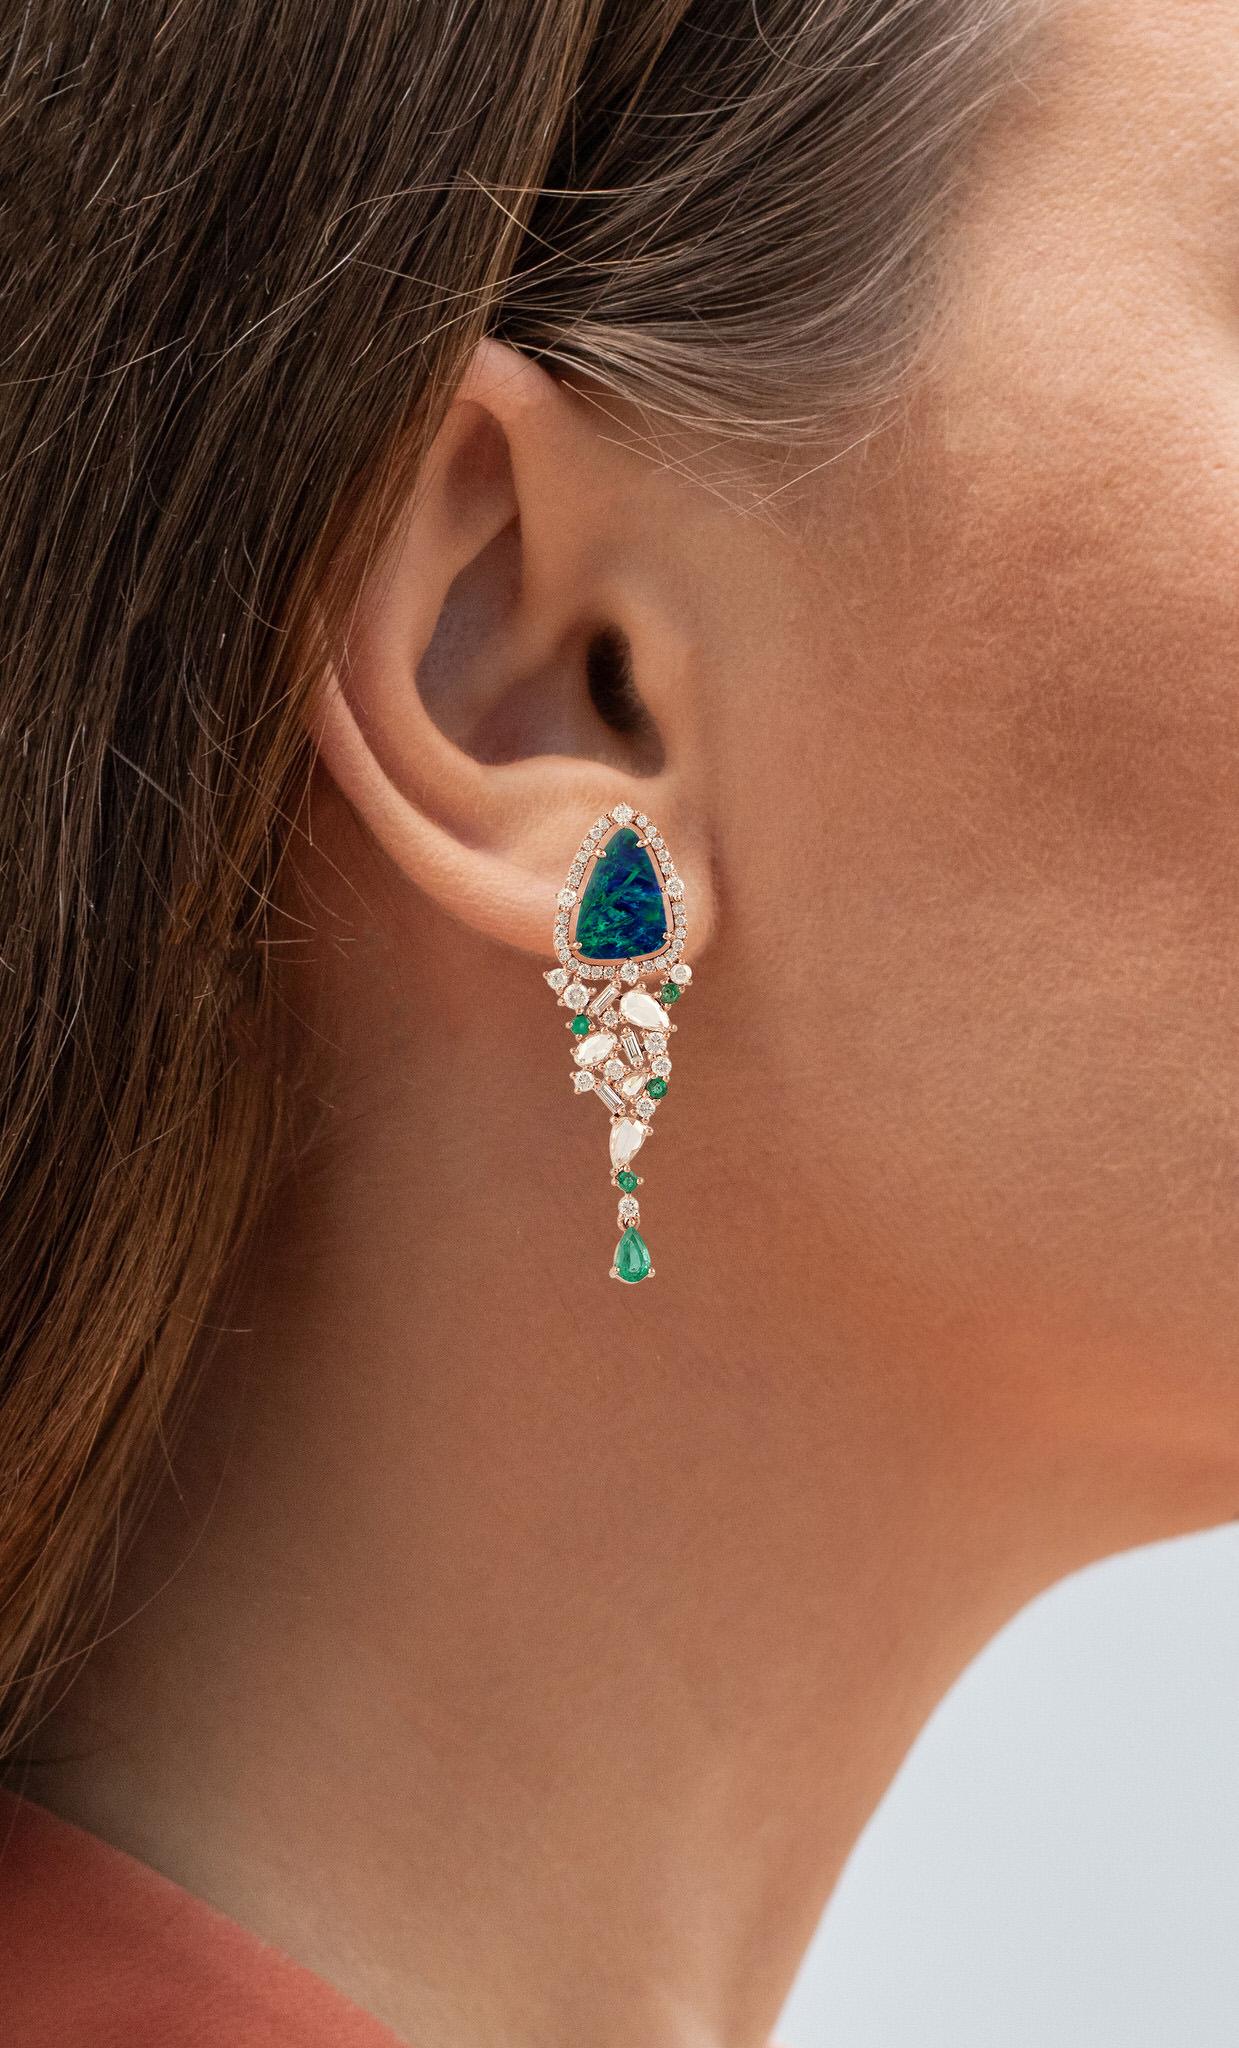 It comes with the appraisal by GIA GG/AJP
All Gemstones are Natural
Opal = 3.41 Carats
 Emerald = 0.68 Carats
Diamonds = 1.78 Carats
Cut: Mixed Cut
Earrings Dimensions: 42 x 12 mm
Metal: 18K Rose Gold
